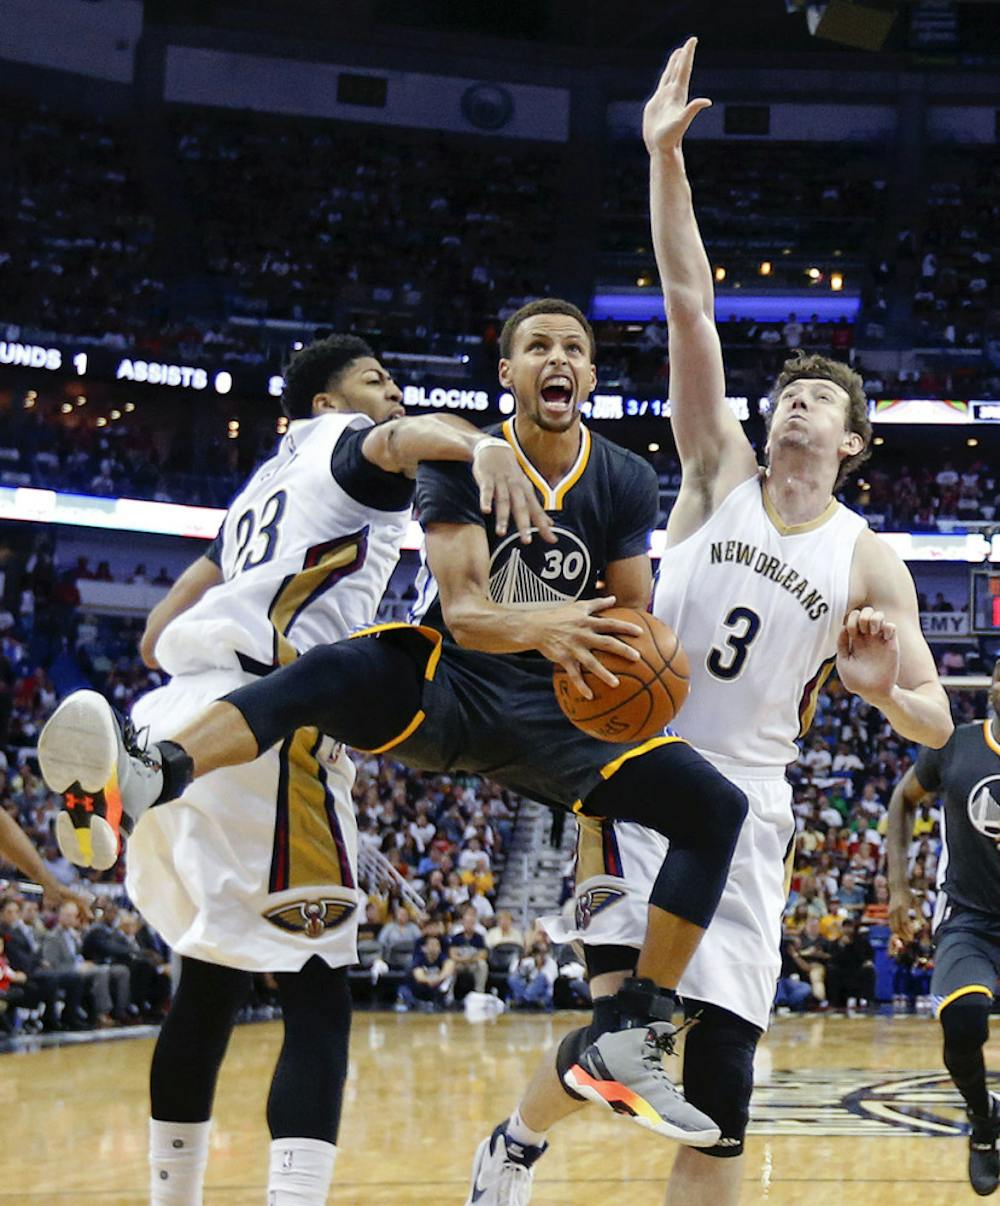 <p>Golden State Warriors guard Stephen Curry (30) drives to the basket between New Orleans Pelicans forward Anthony Davis (23) and center Omer Asik (3) in the second half of an NBA basketball game in New Orleans, Saturday, Oct. 31, 2015. The Warriors won 134-120.</p>